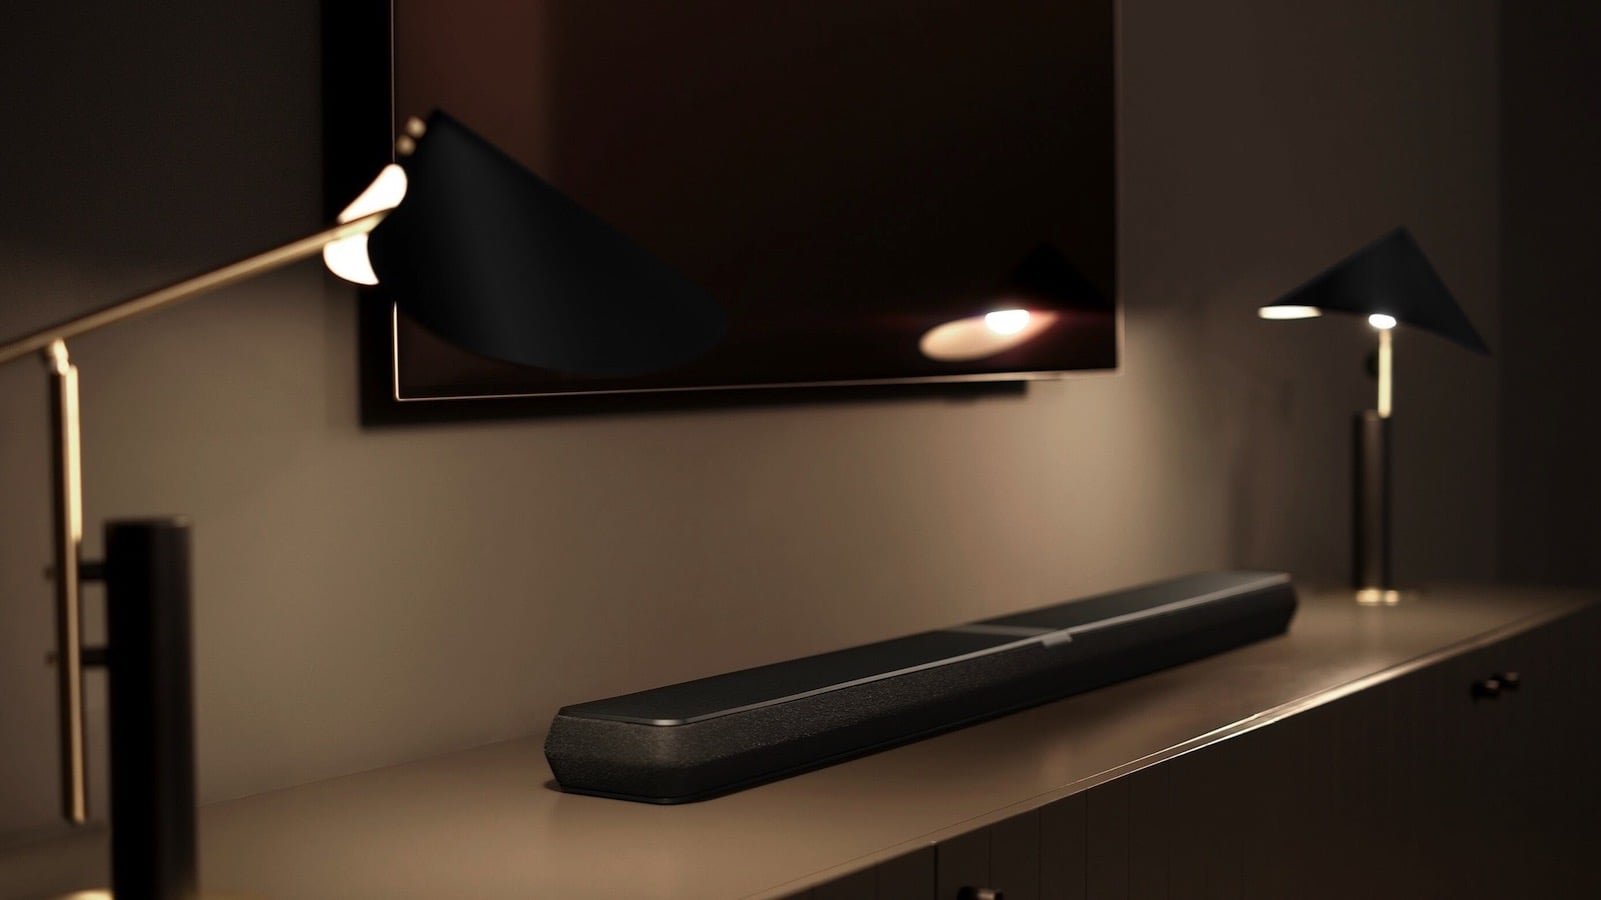 Bowers & Wilkins Panorama 3 Dolby Atmos Soundbar is a connected home theater powerhouse